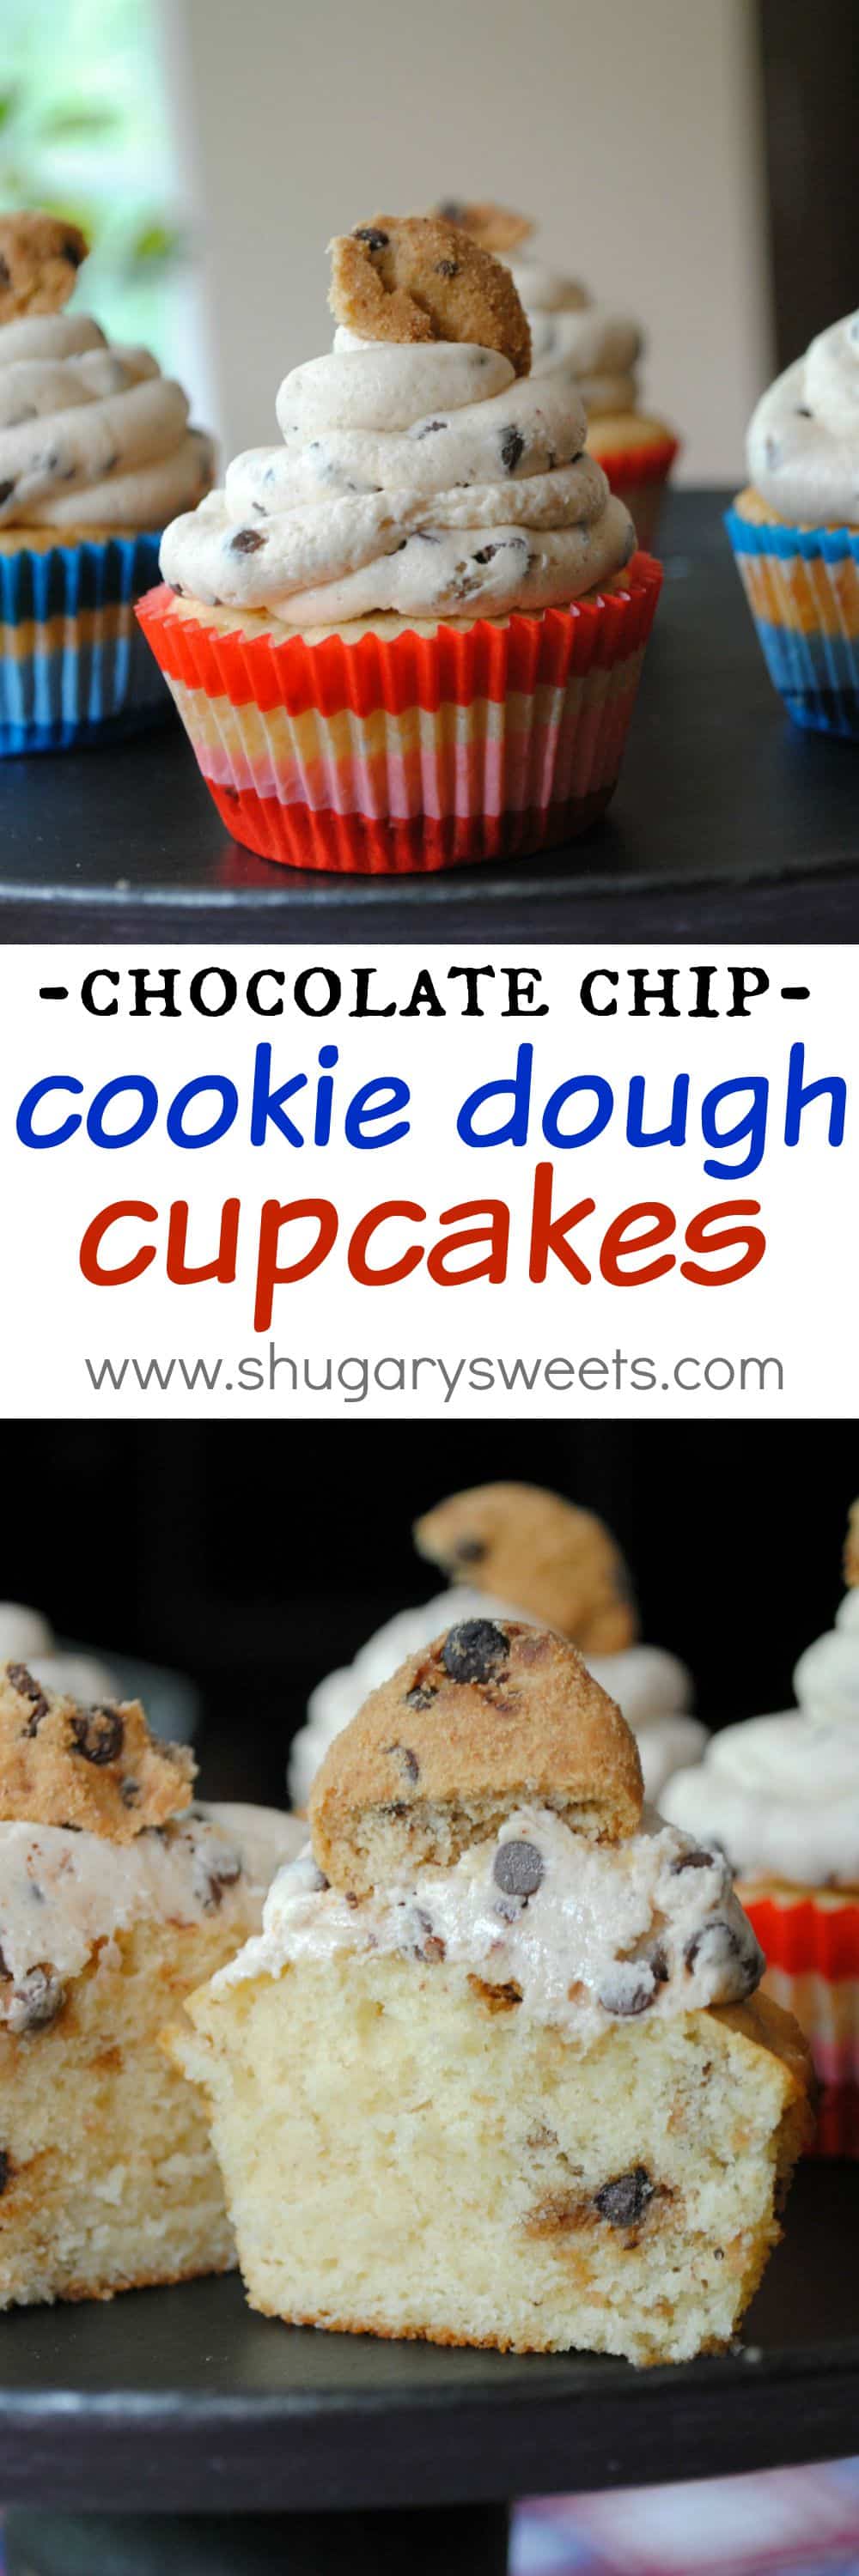 Chocolate Chip Cookie Dough Cupcakes - Shugary Sweets